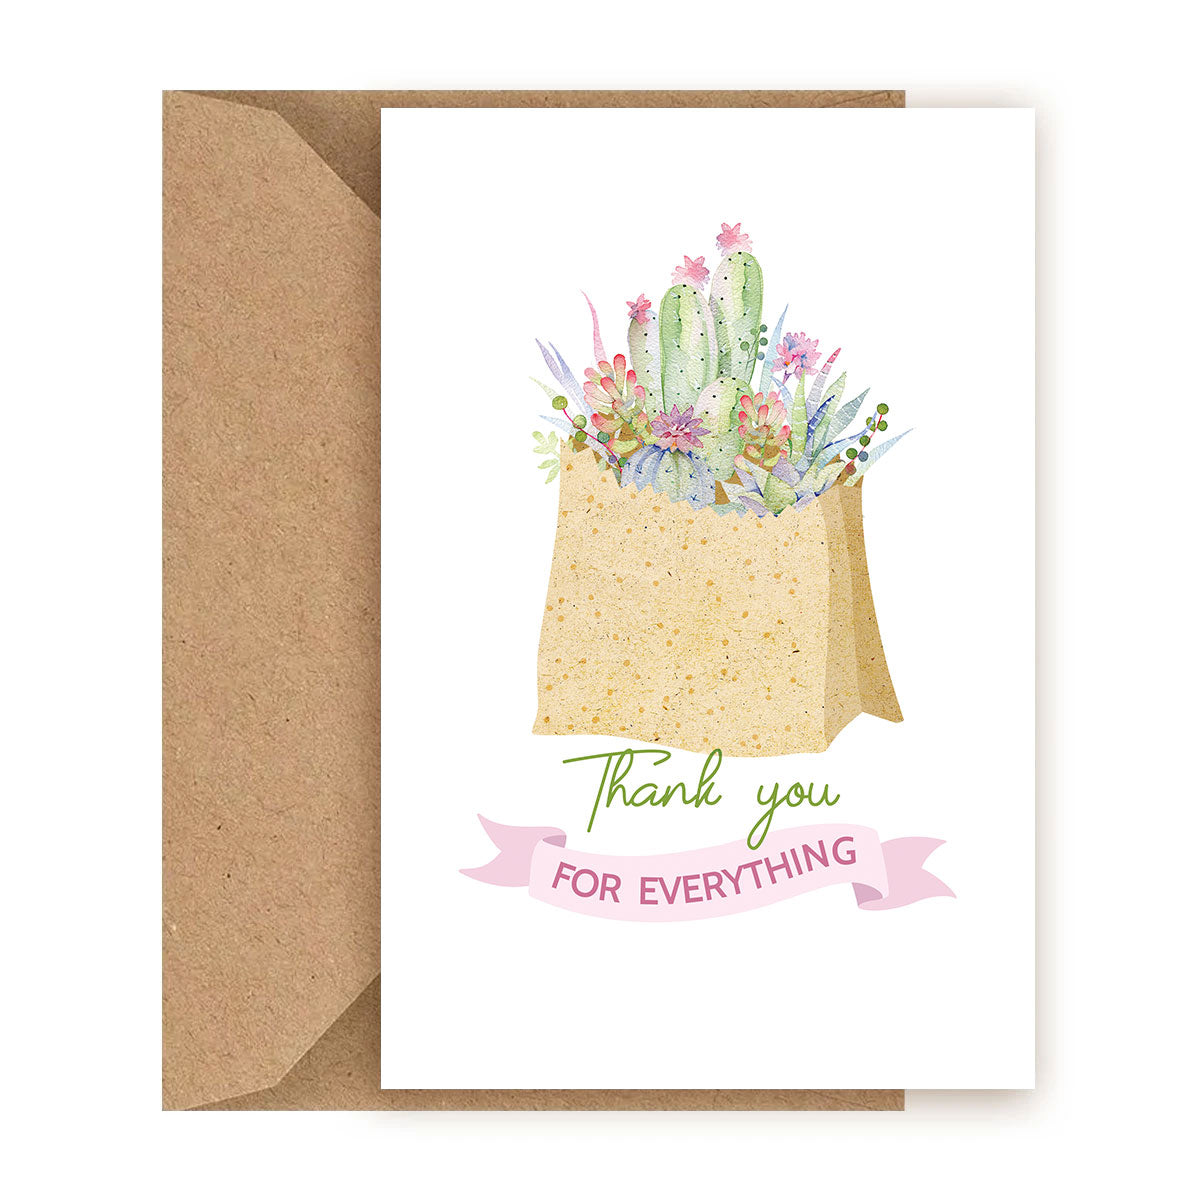 Thank you card for employee, Employee Appreciation Cards for sale, Corporate succulent gift with thank you card, Thank You Live Succulent Gift Box for sale, Succulent thank you cards with kraft envelope, Succulent thank you cards to suit any occasion, Staff Appreciation Card ideas, Thank you note to employee for a job well done, Thank you card for employee appreciation	 	 	 	 	 	 	 	